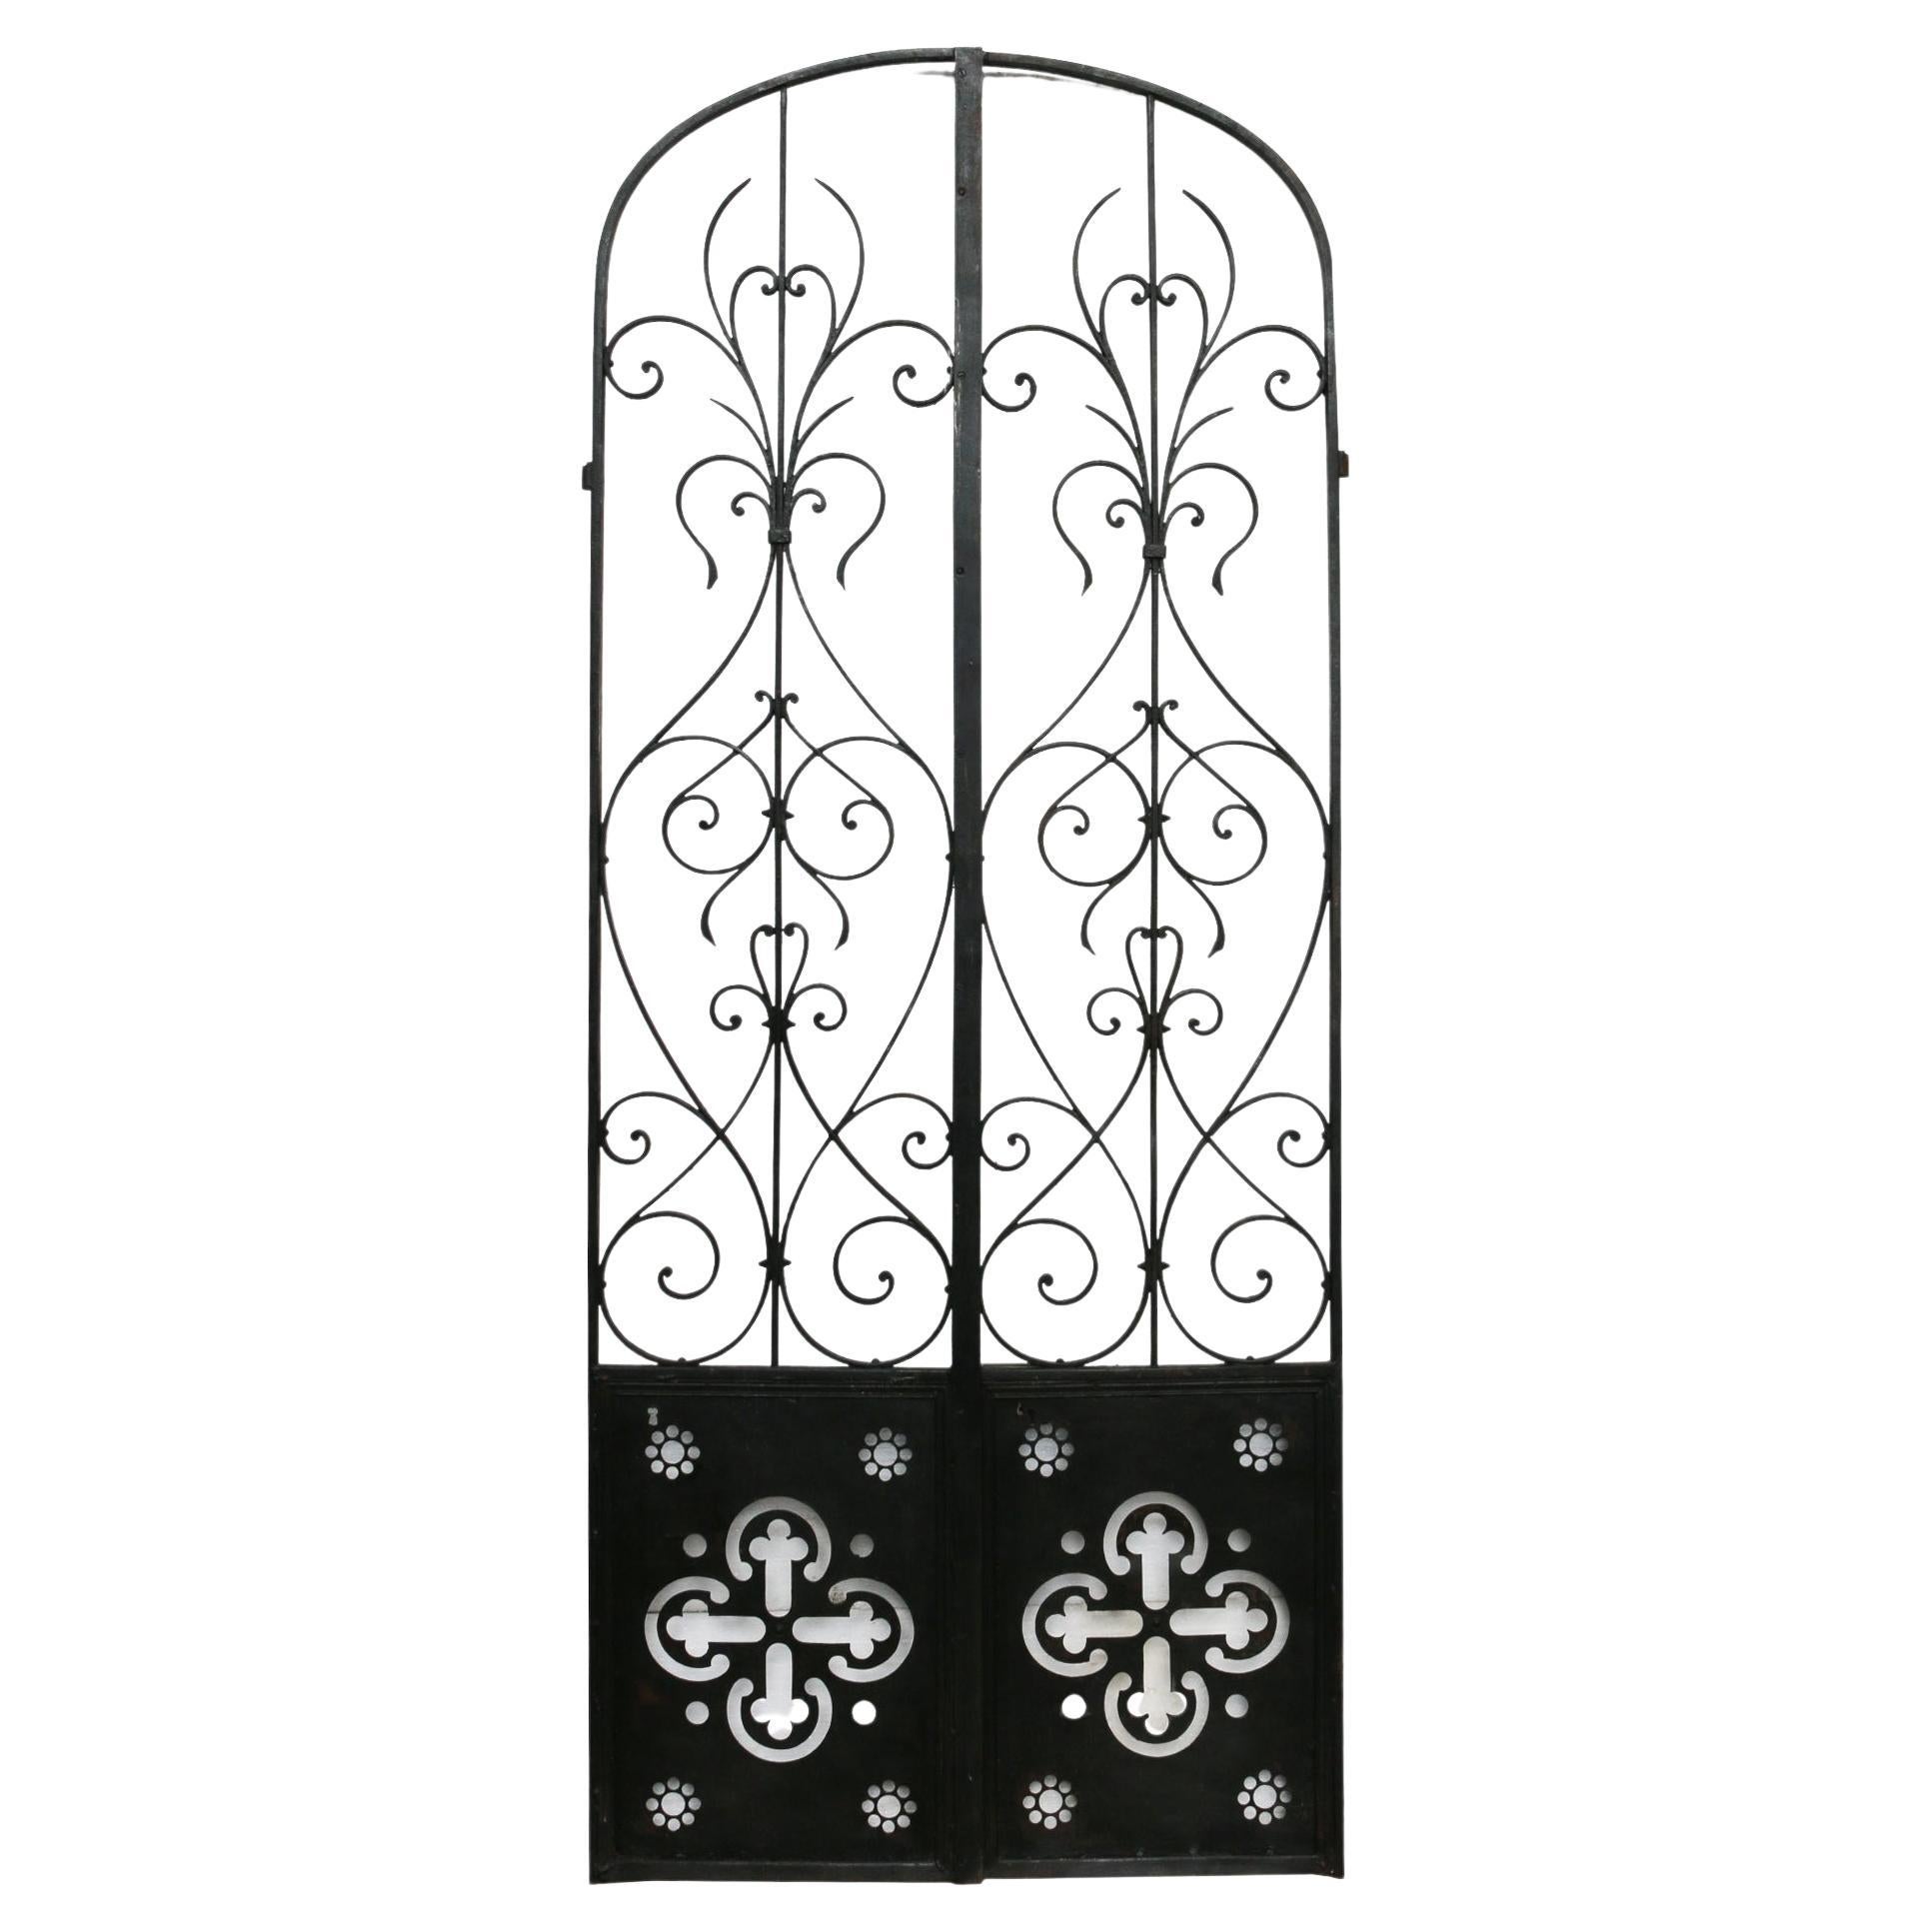 Set of Antique Wrought Iron Arched Gates For Sale